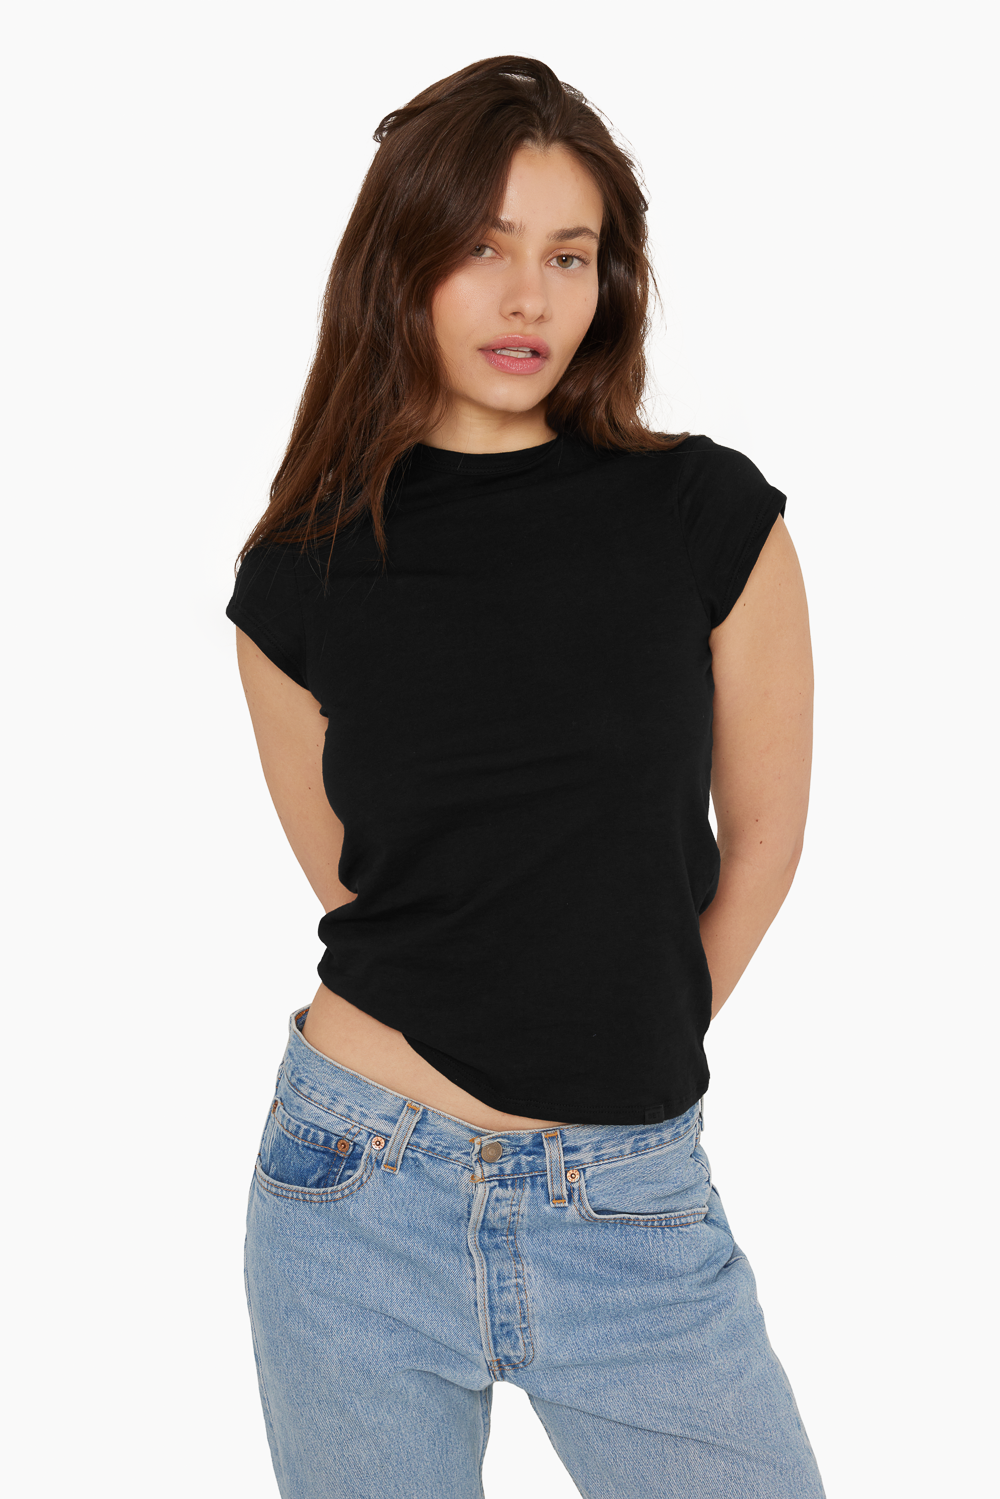 CLASSIC COTTON GIRLFRIEND TEE - ONYX Featured Image